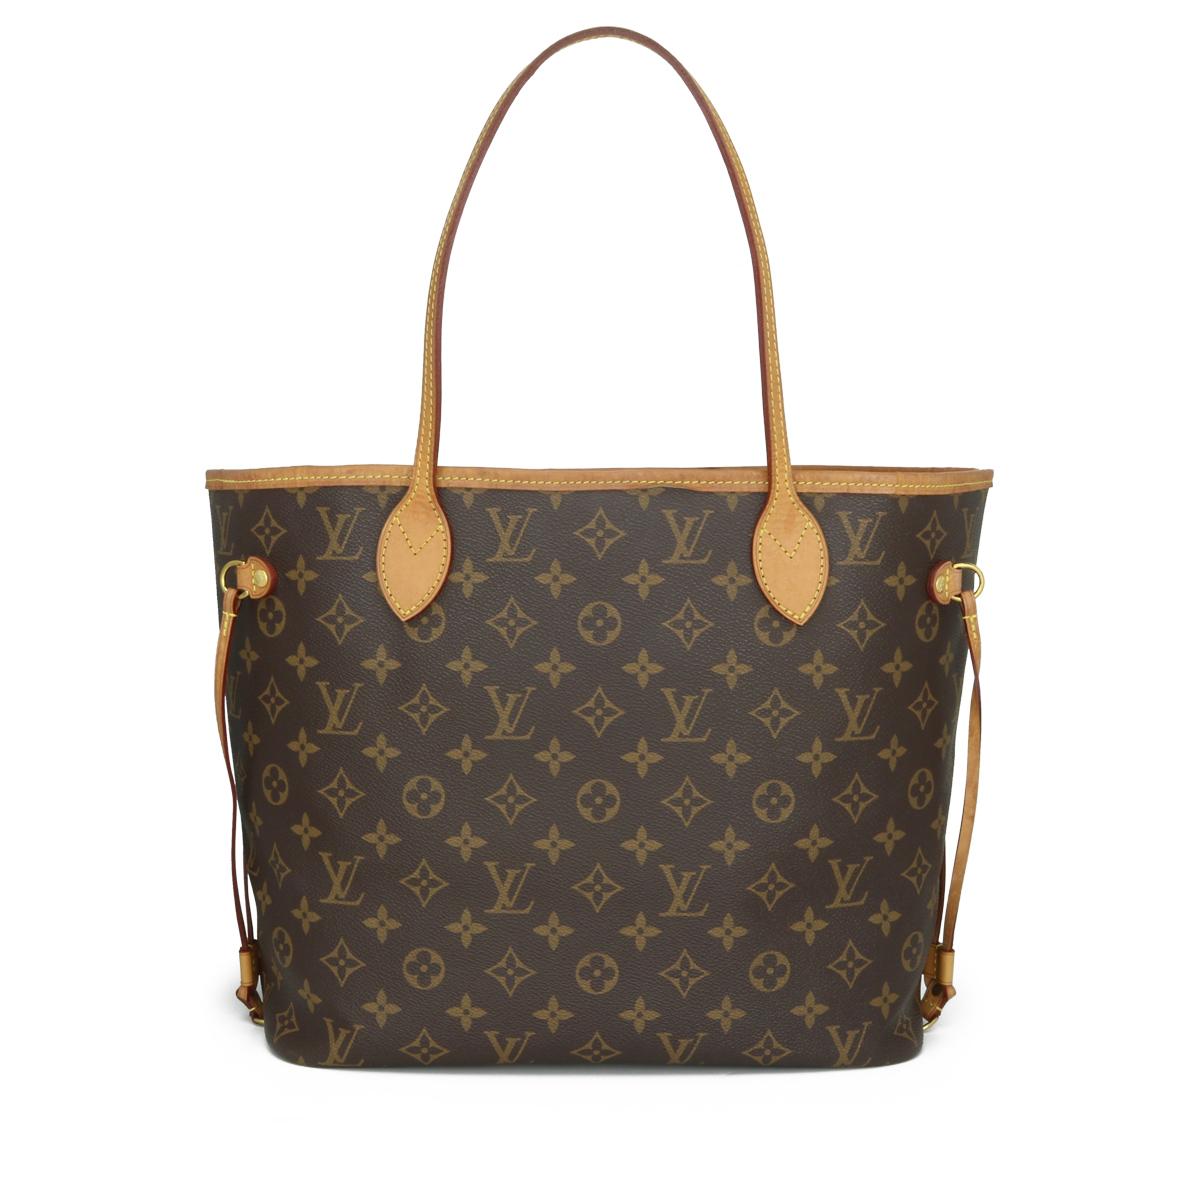 Louis Vuitton Neverfull MM in Monogram with Pivoine Interior 2019.

This bag is in very good condition. 

- Exterior Condition: Very good condition. Very light surface rubbing to four base corners. General marking, leather wear, water marks around